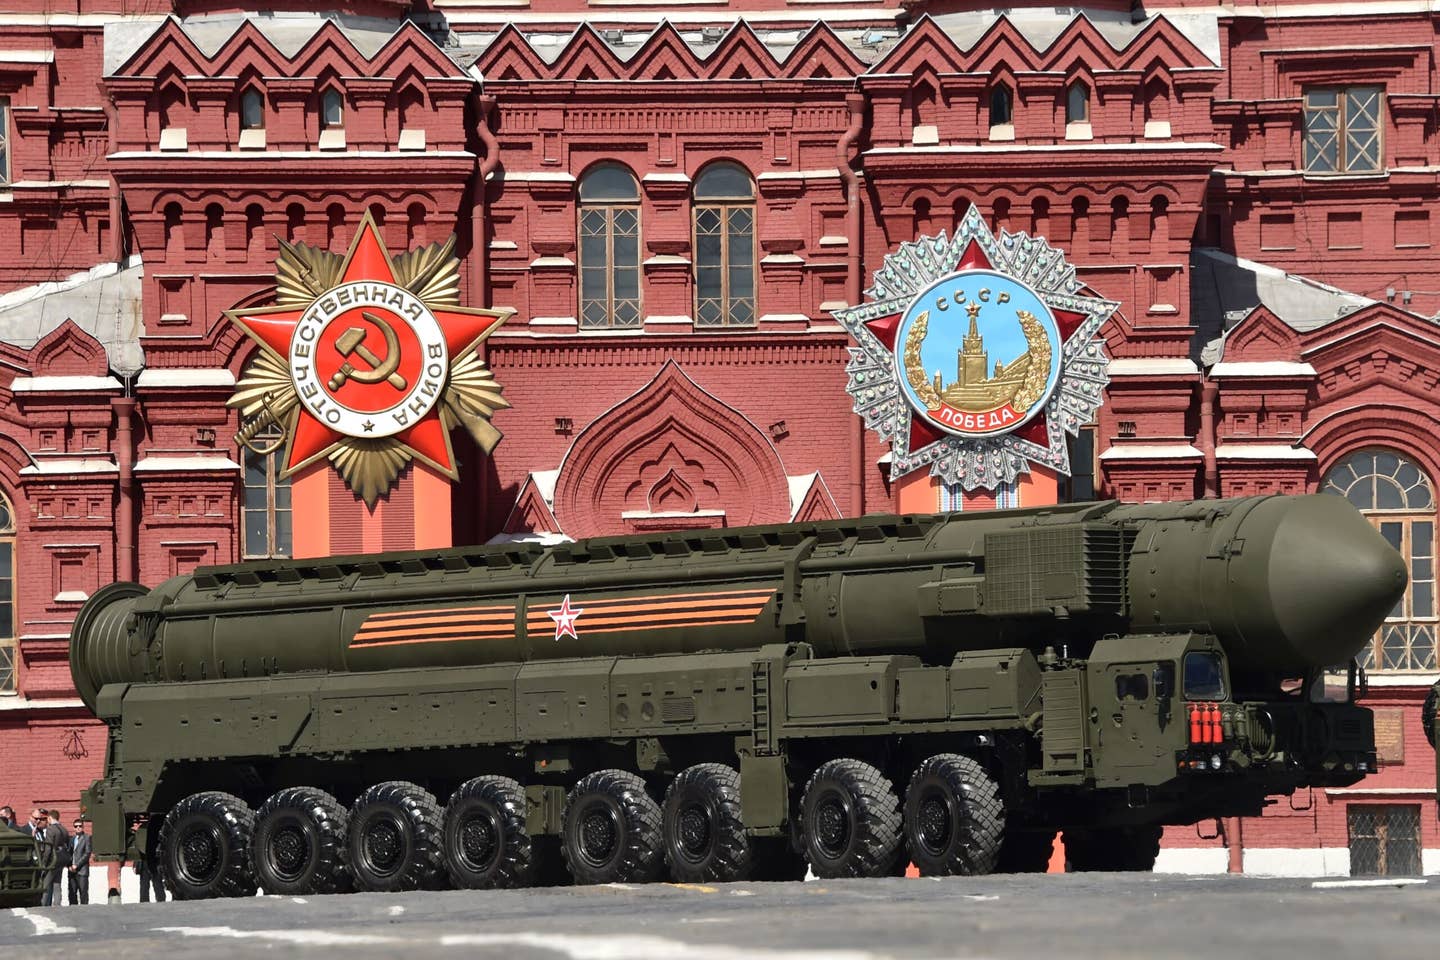 A Yars intercontinental ballistic missile system drives through Red Square in Moscow, during a rehearsal for the Victory Day military parade in 2015. <em>KIRILL KUDRYAVTSEV/AFP via Getty Images</em>